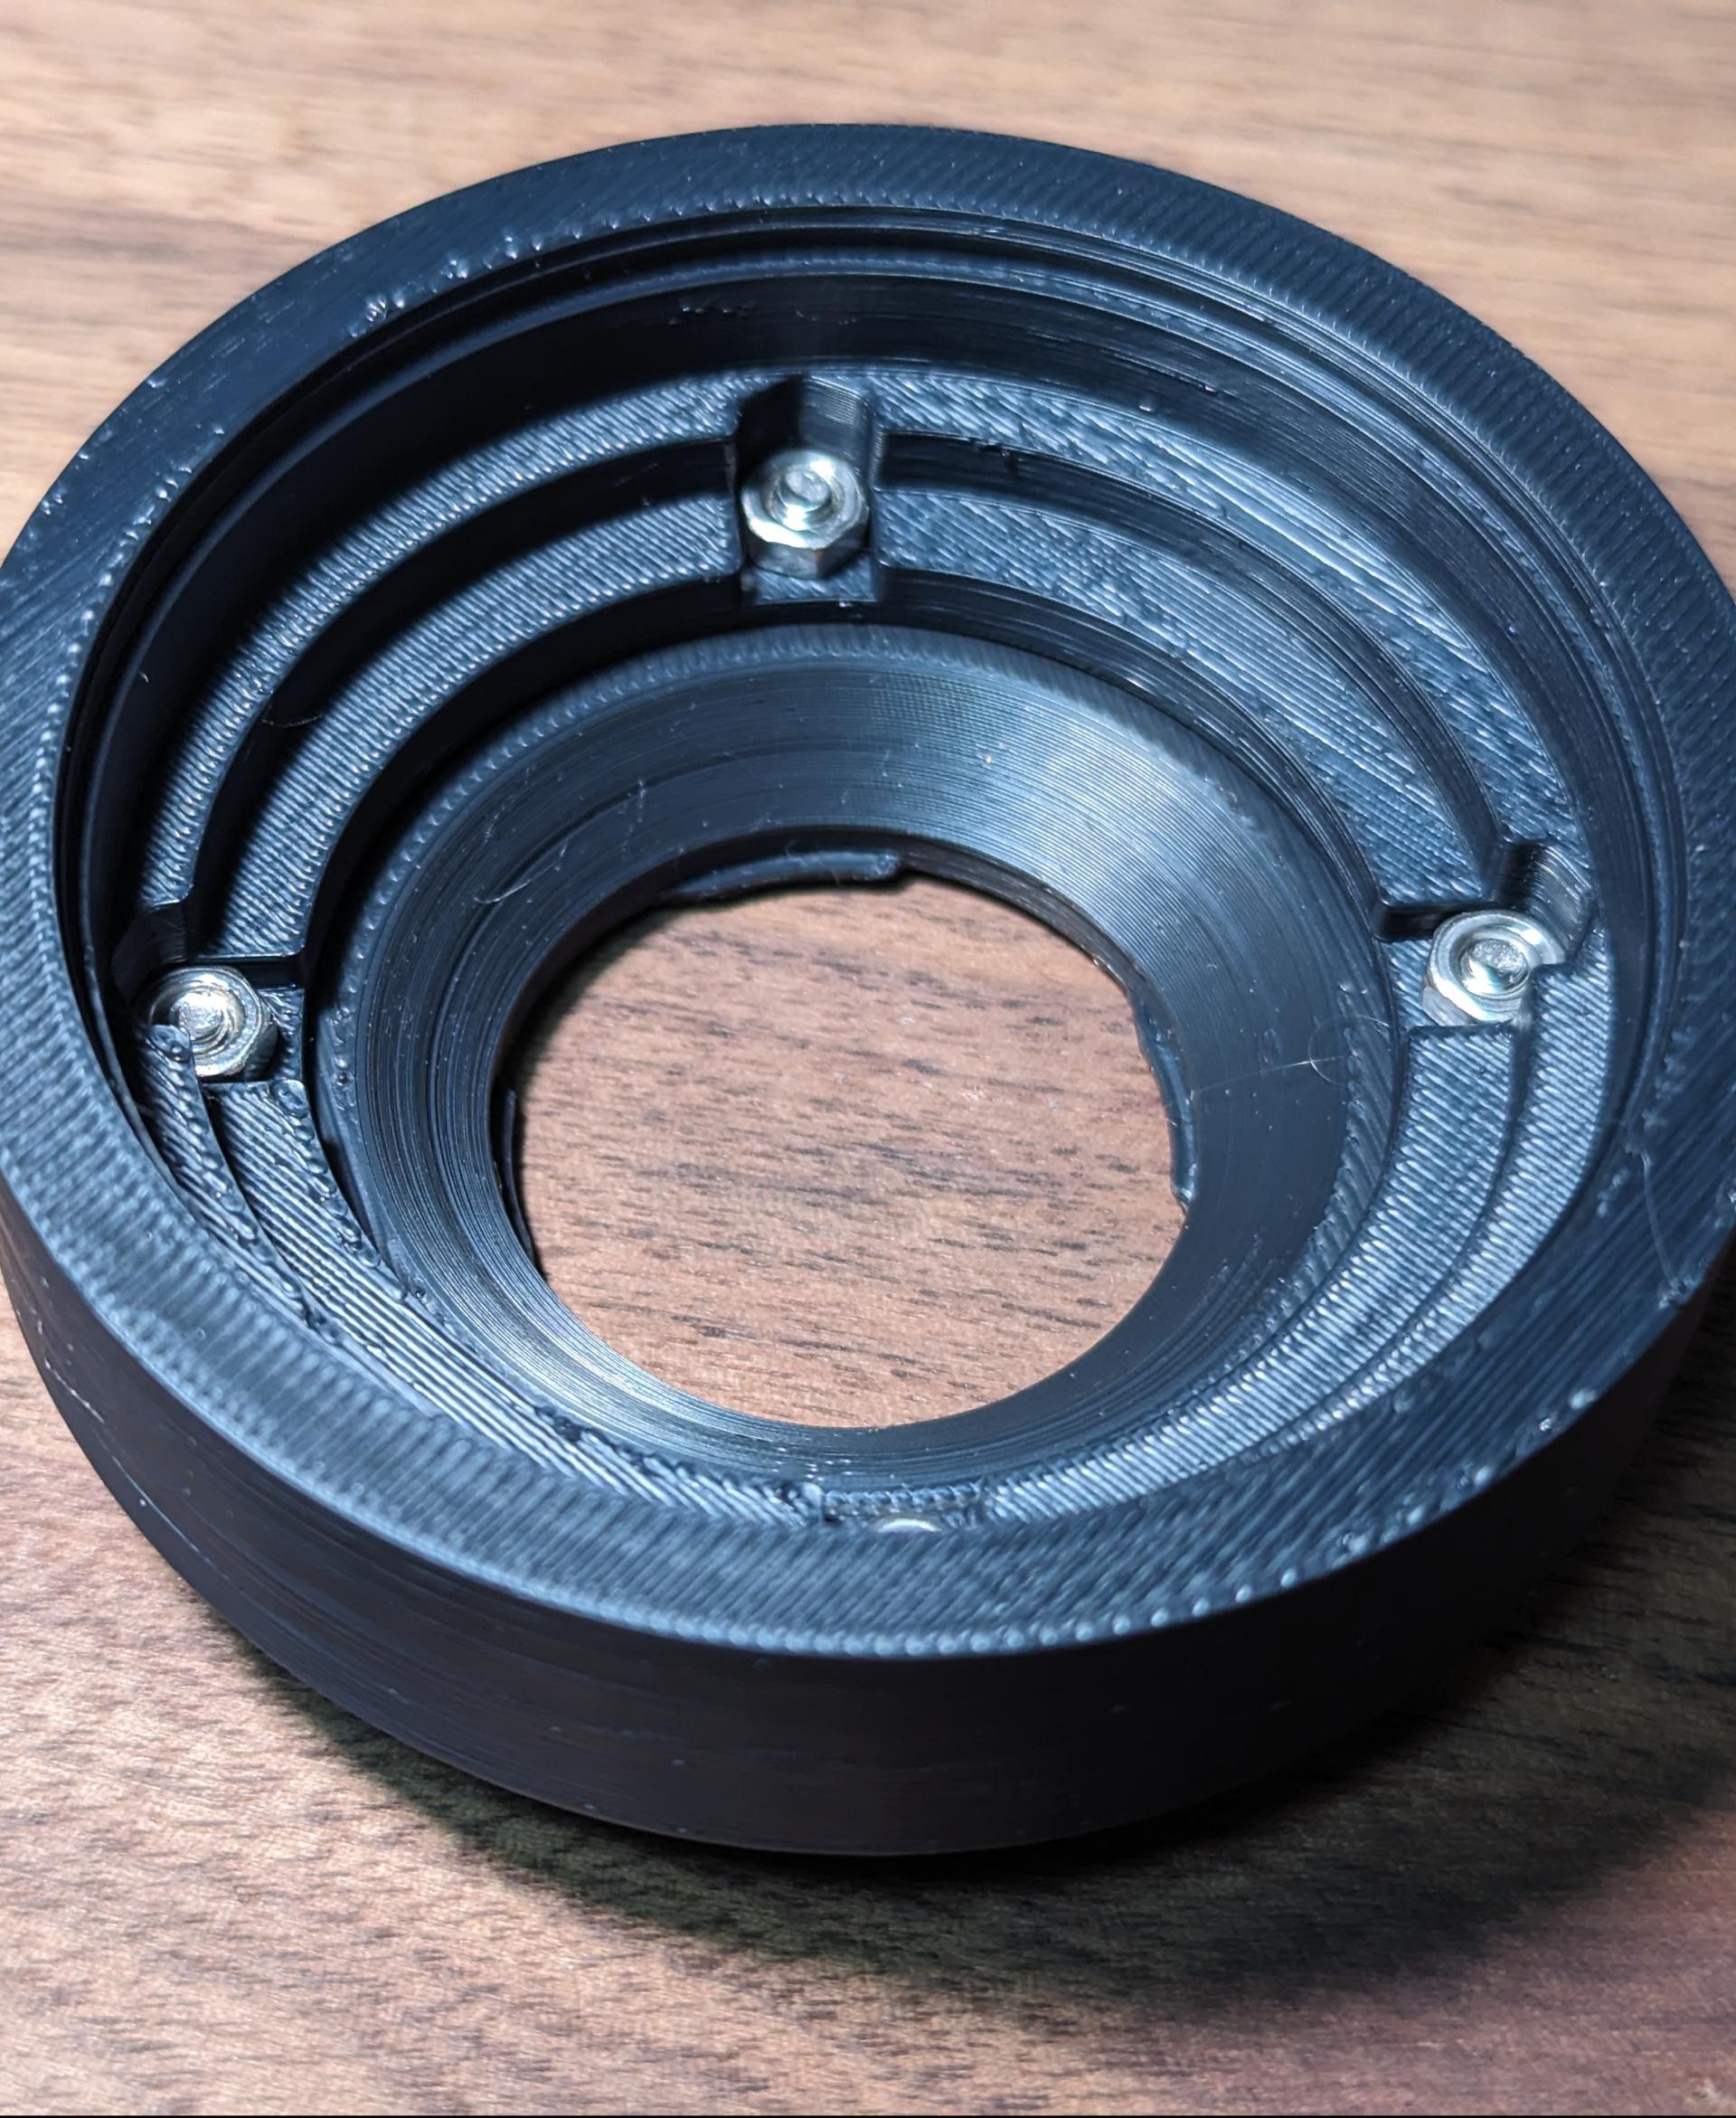 Insta360 Ace Pro Lens Mounting Plate - Mounting plate with an example lens mount attached via the 52mm spaced m3 countersunk bolt holes. - 3d model